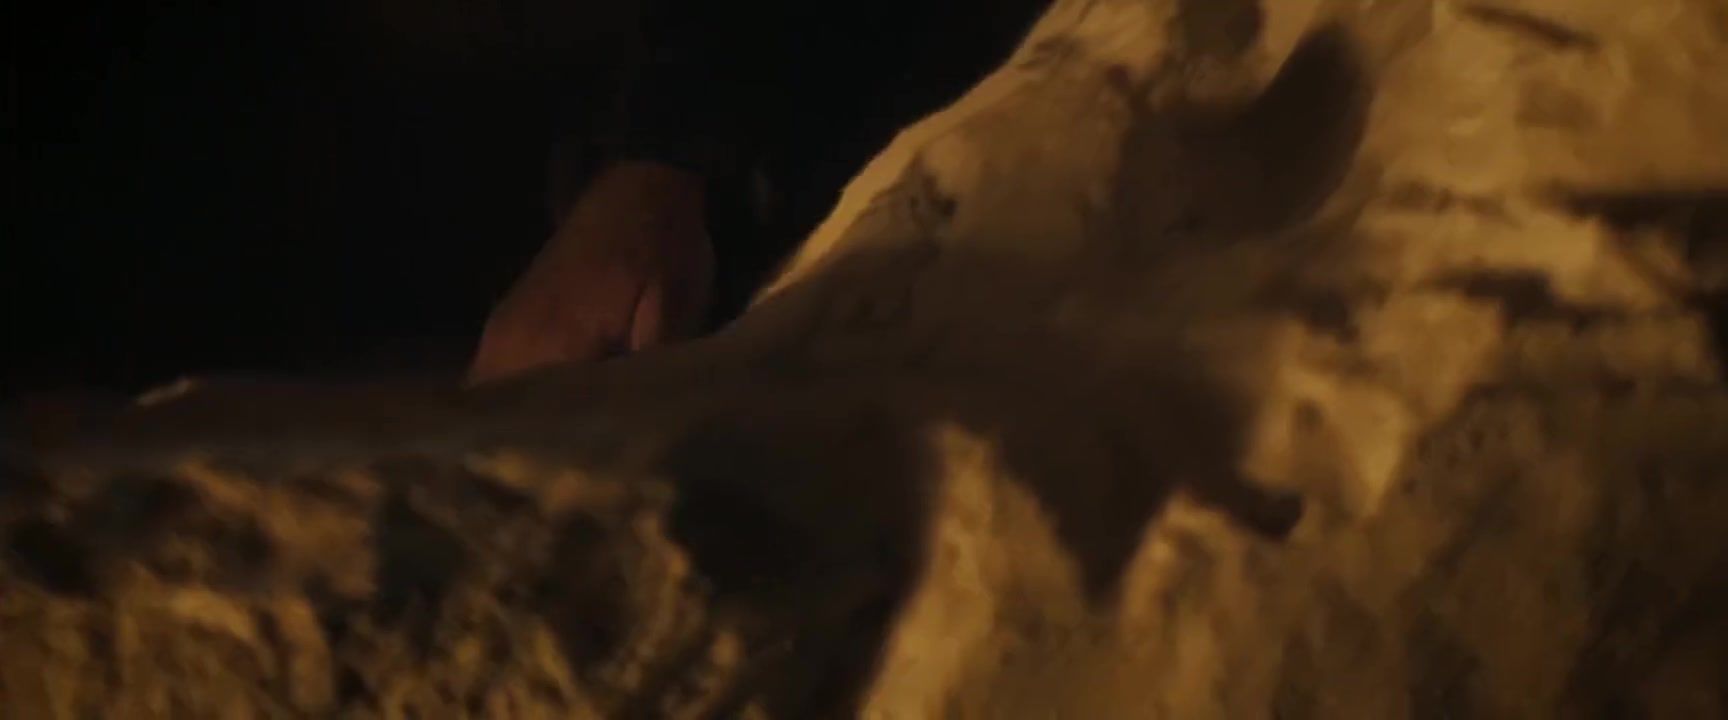 SwingLifestyle Sexy video Emilia Clarke Fucked & Posing Nude in Voice from the Stone (2017) Moan